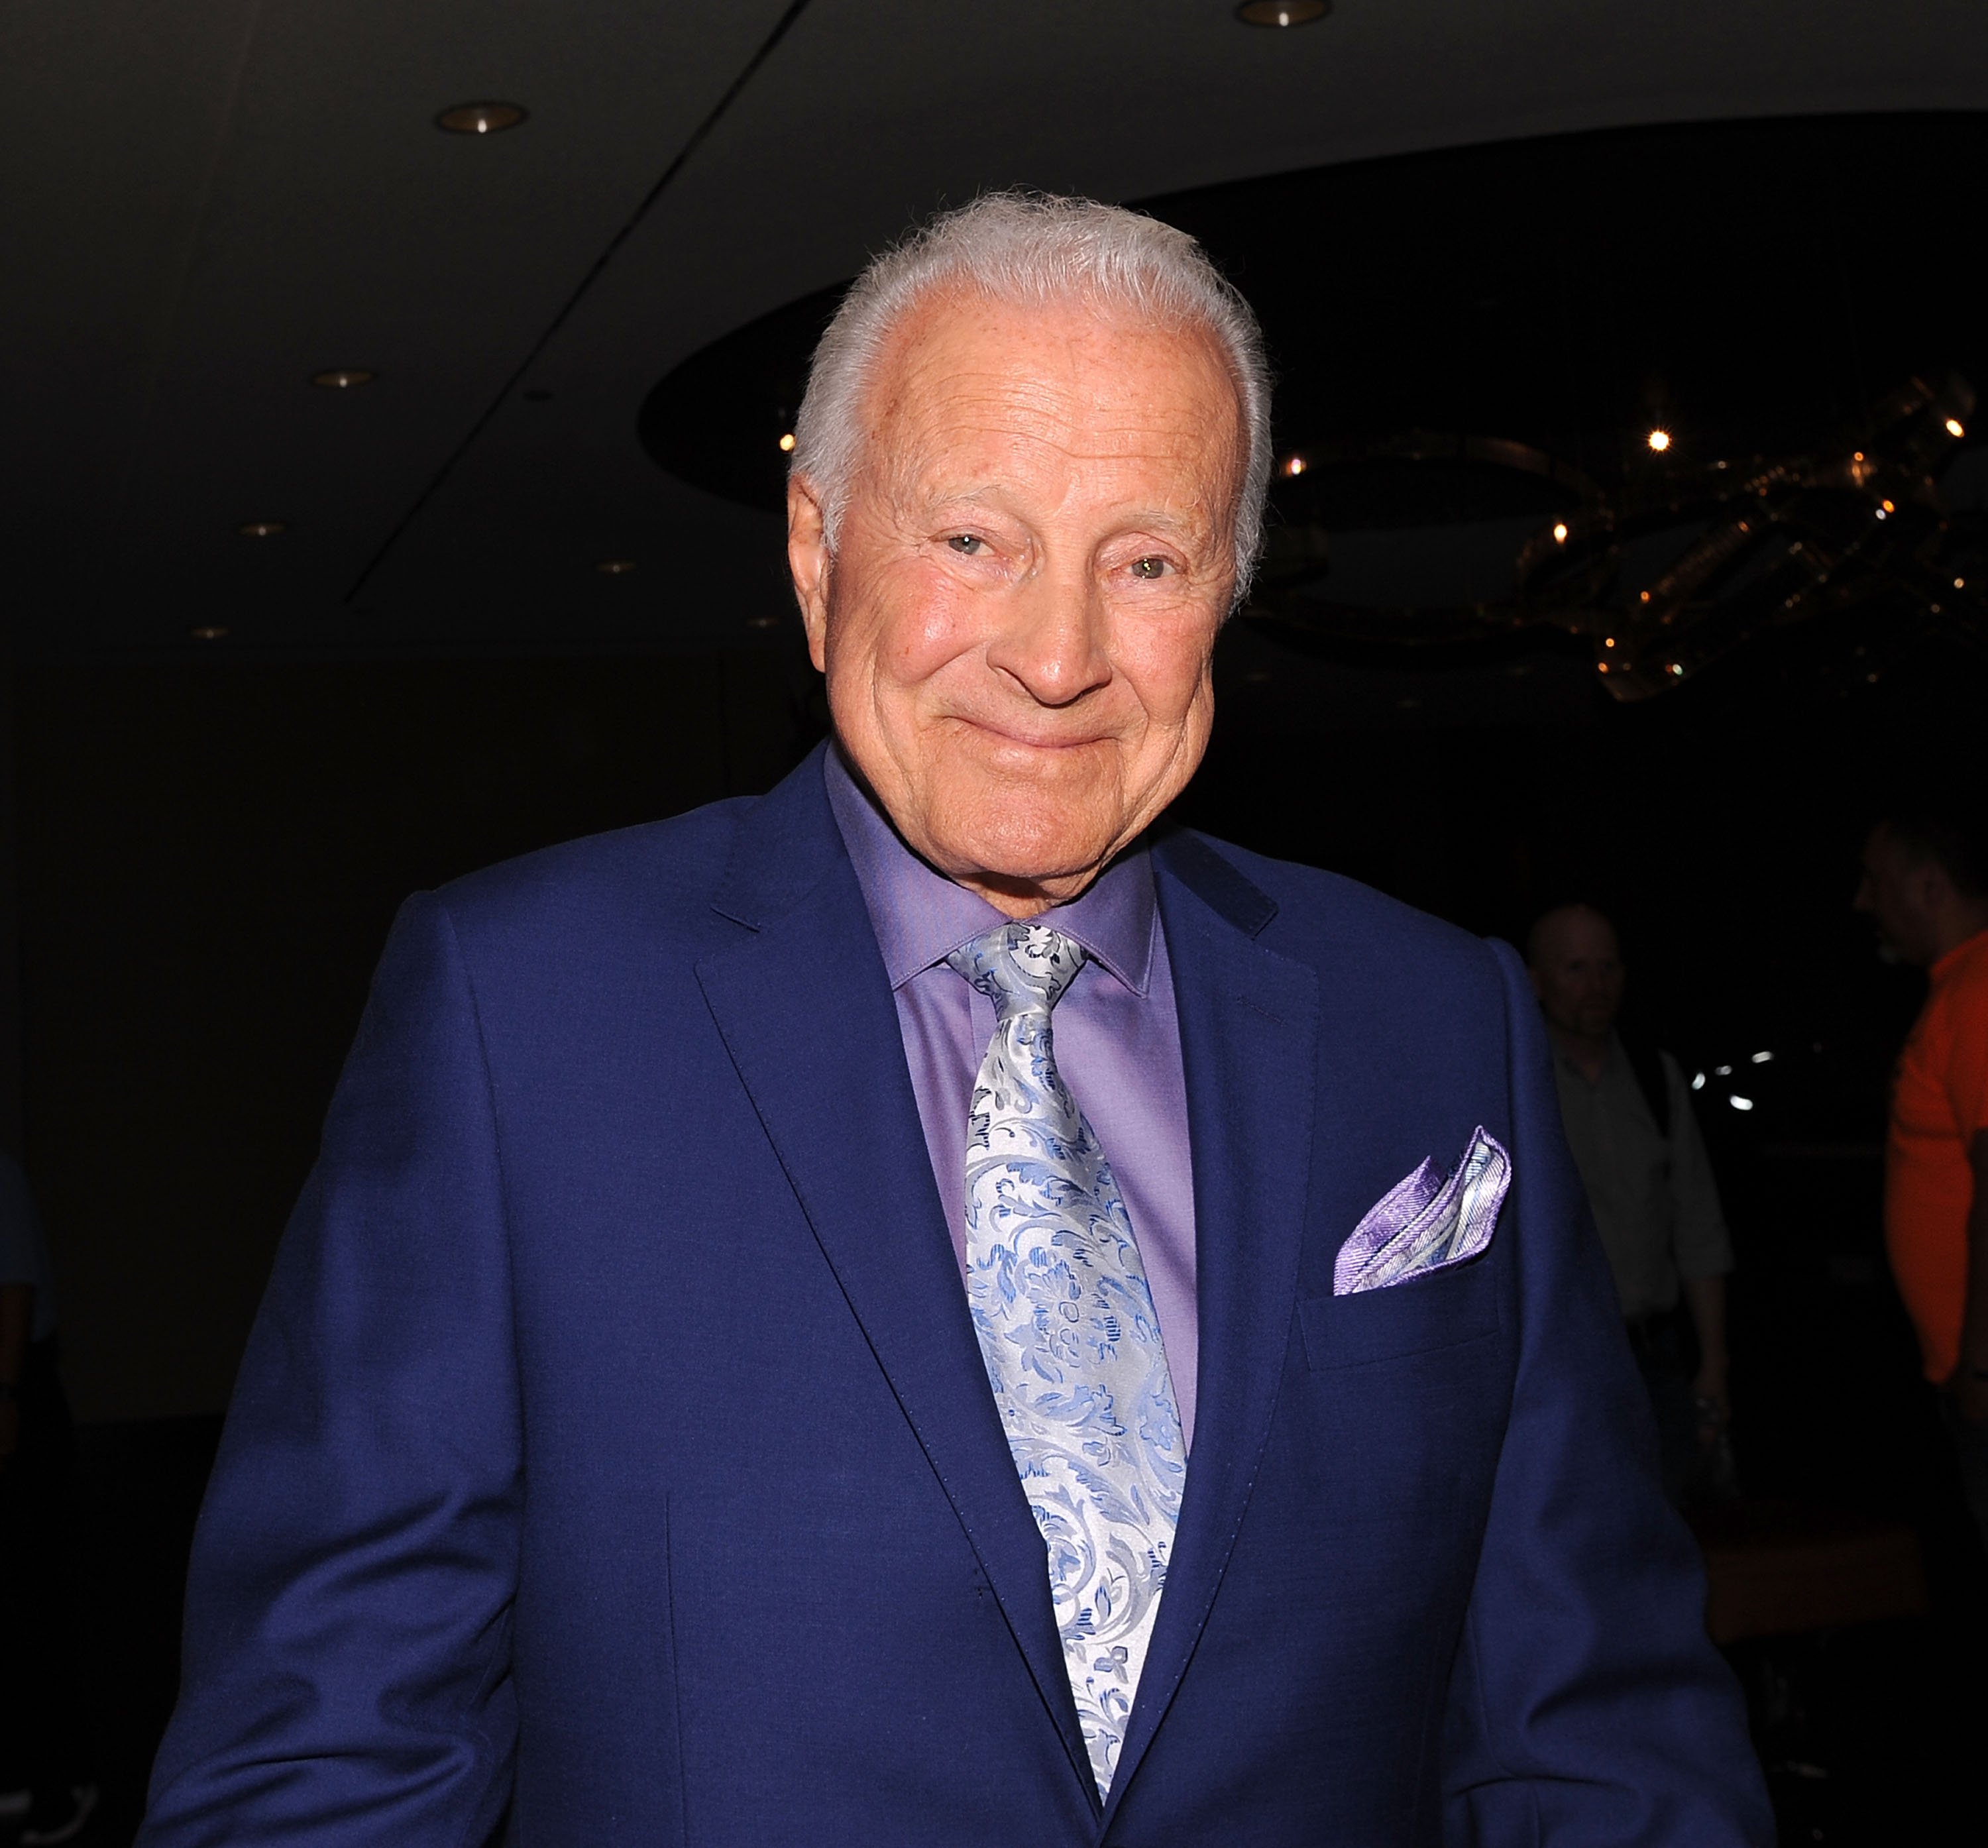 Lyle Waggoner attends Chiller Theatre Expo Spring 2018 at Hilton Parsippany on April 27, 2018. | Source: Getty Images